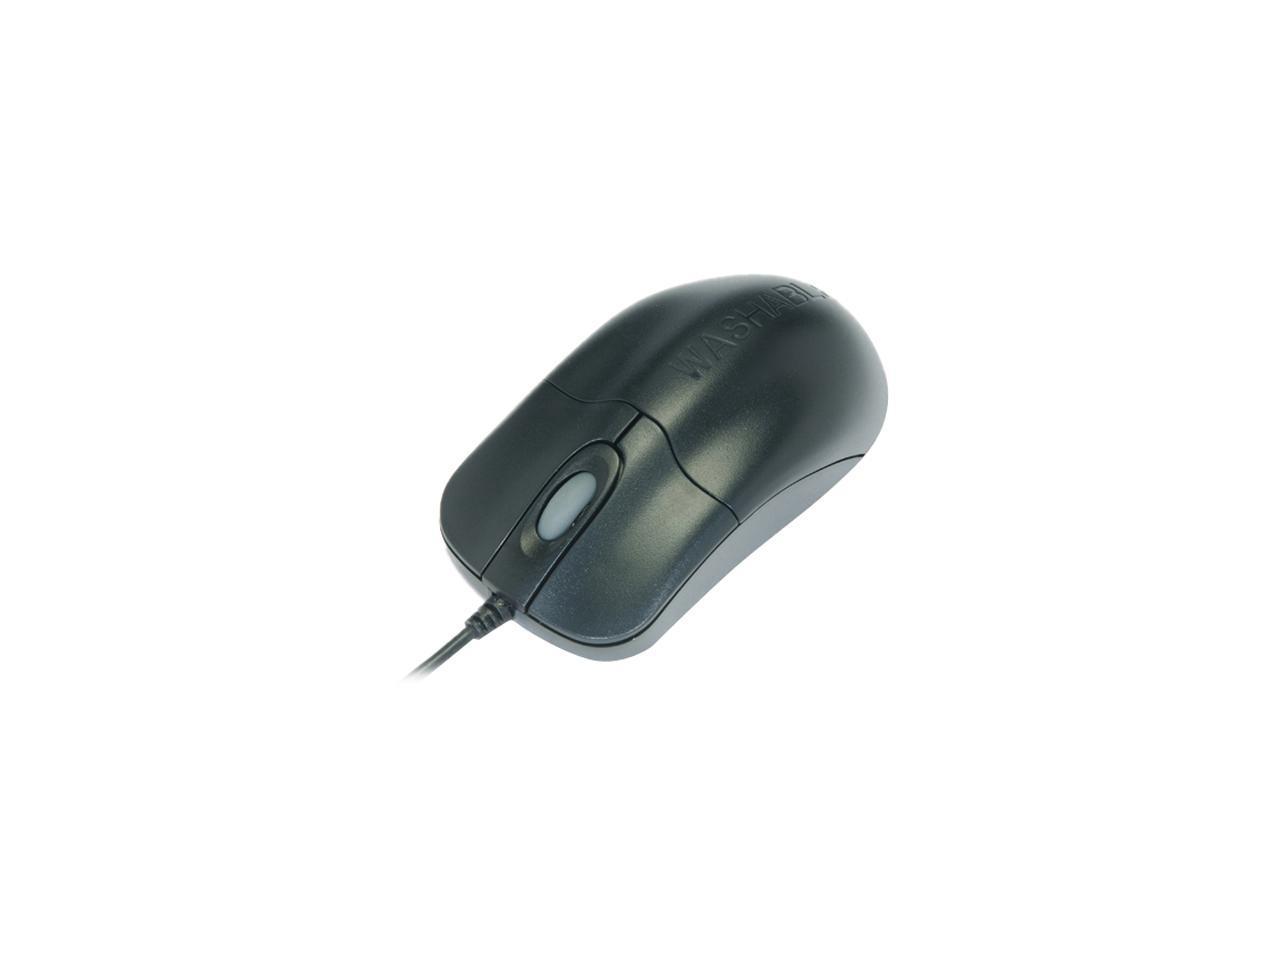 Seal Shield Silver Storm USB Optical Mouse - STM042 Used